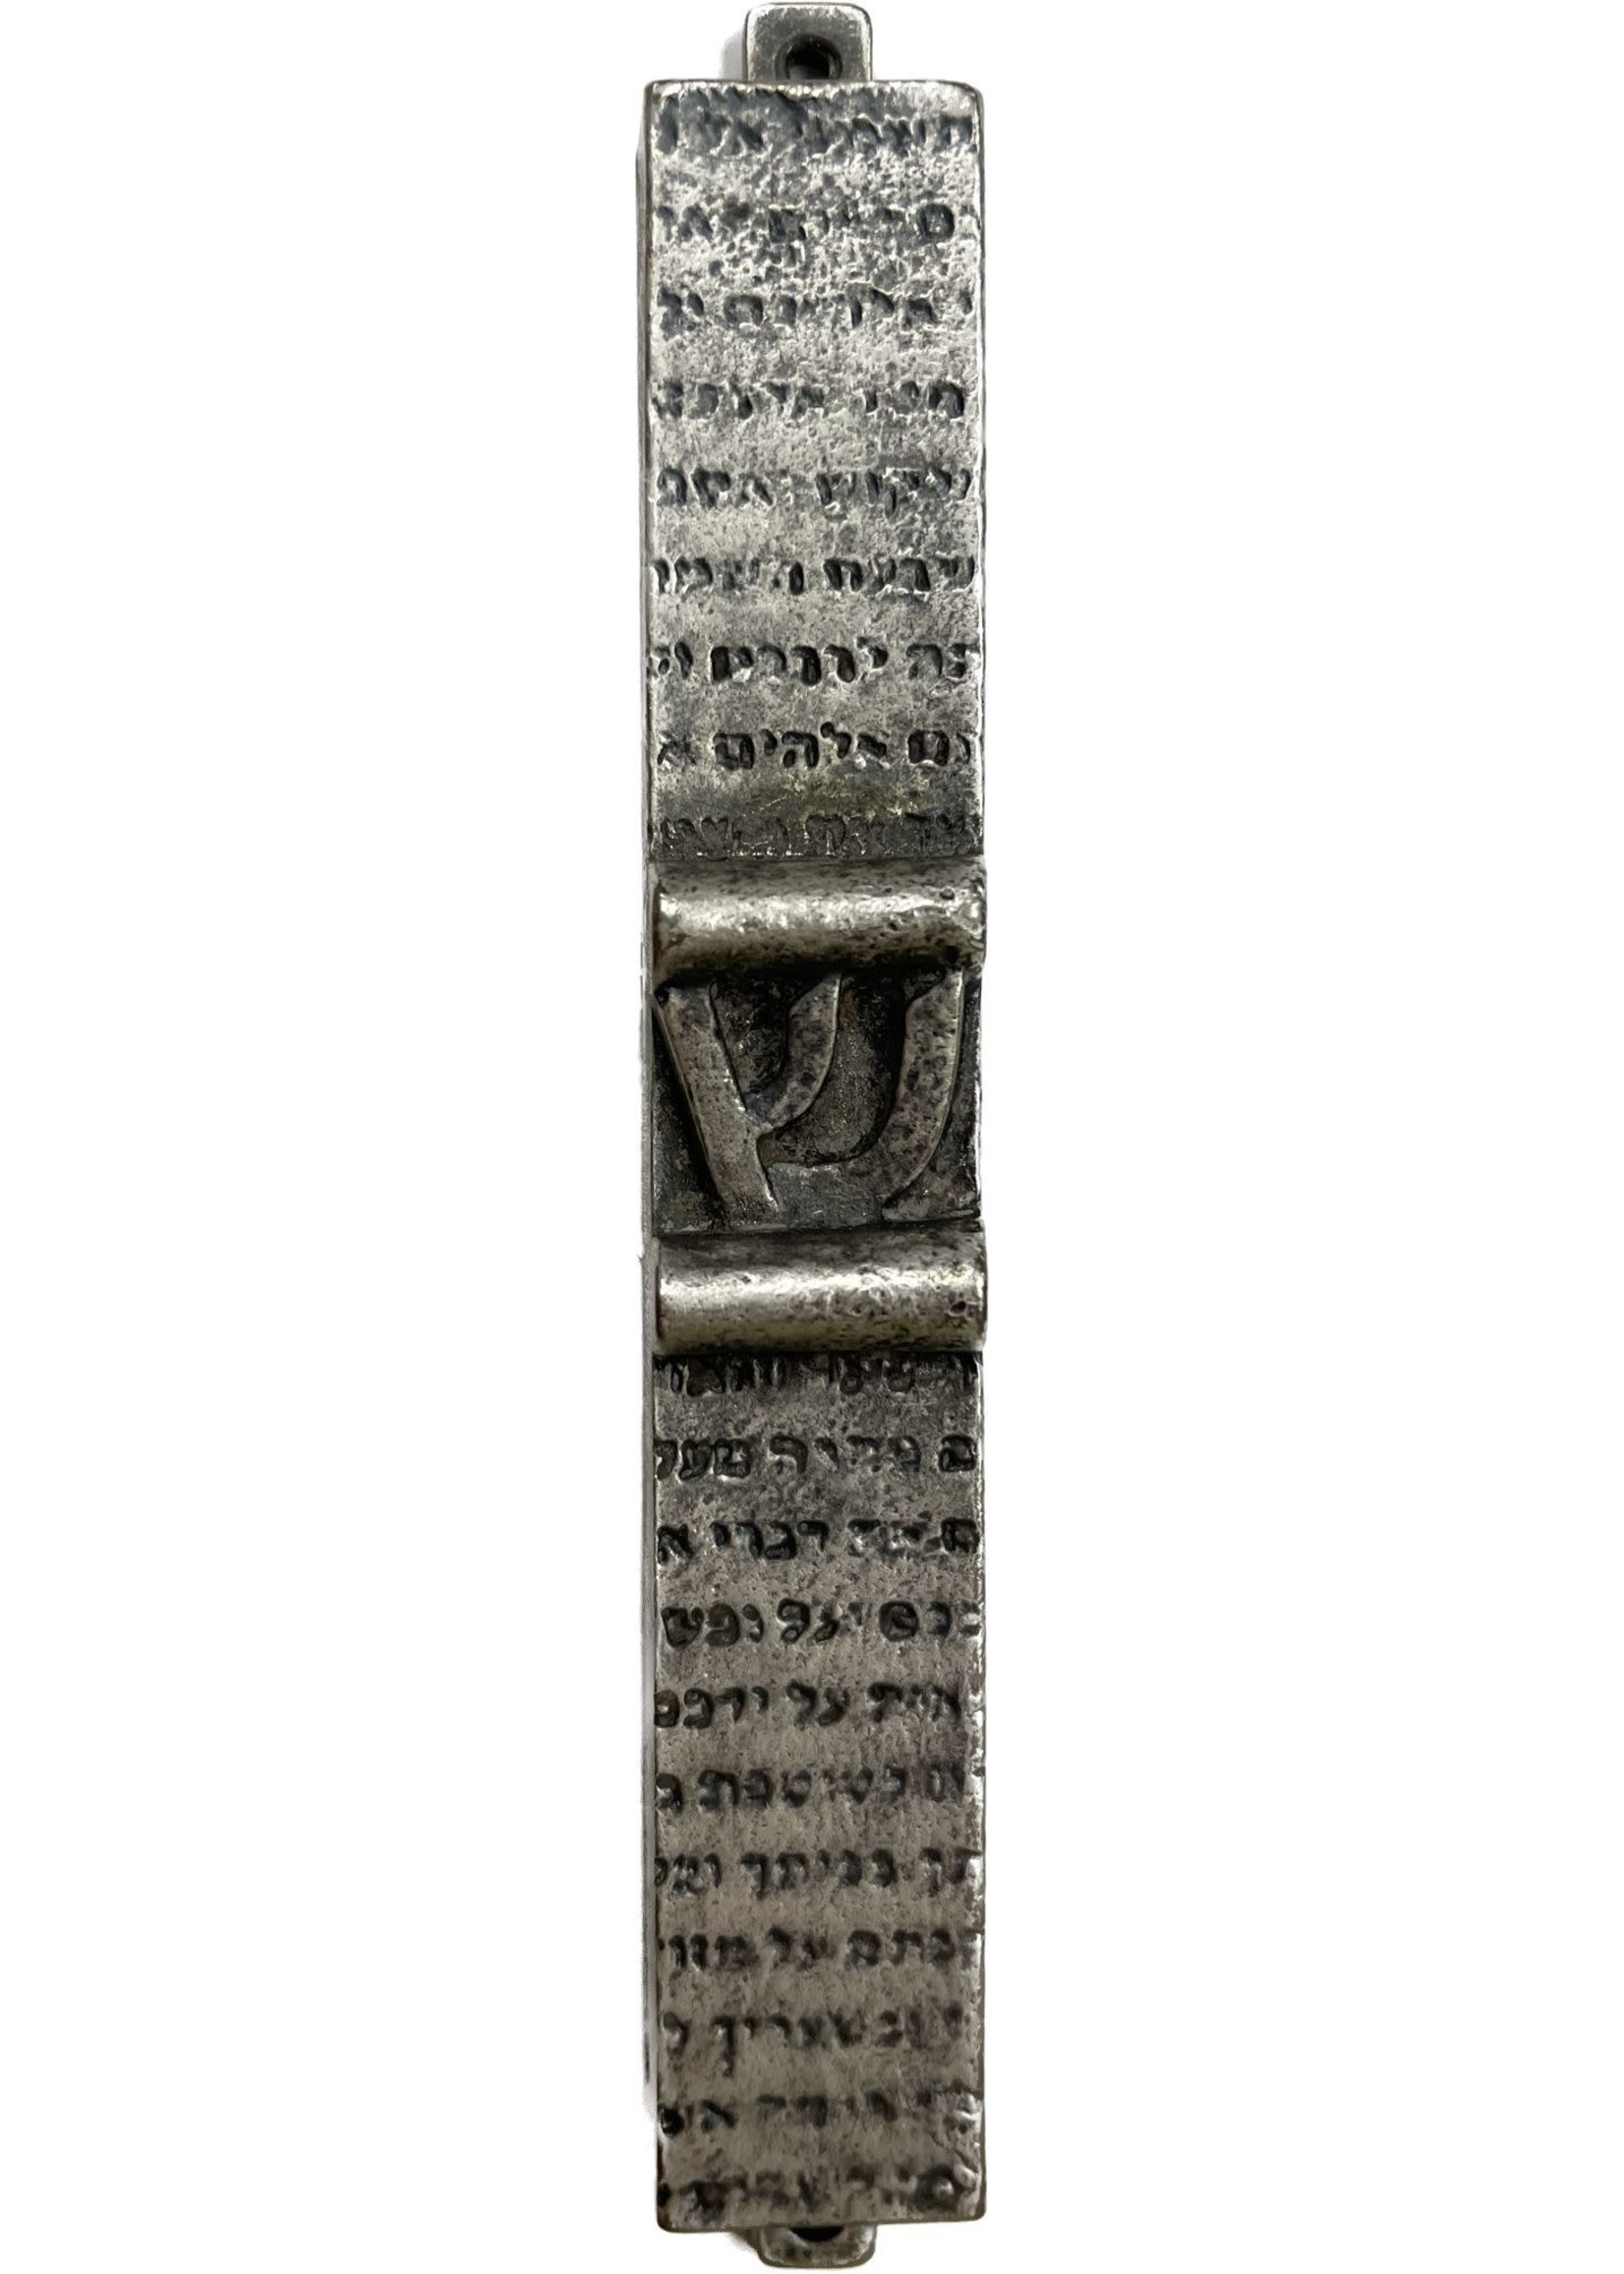 MEZUZAH COVER PEWTER SHEMA SCROLL 7 CM